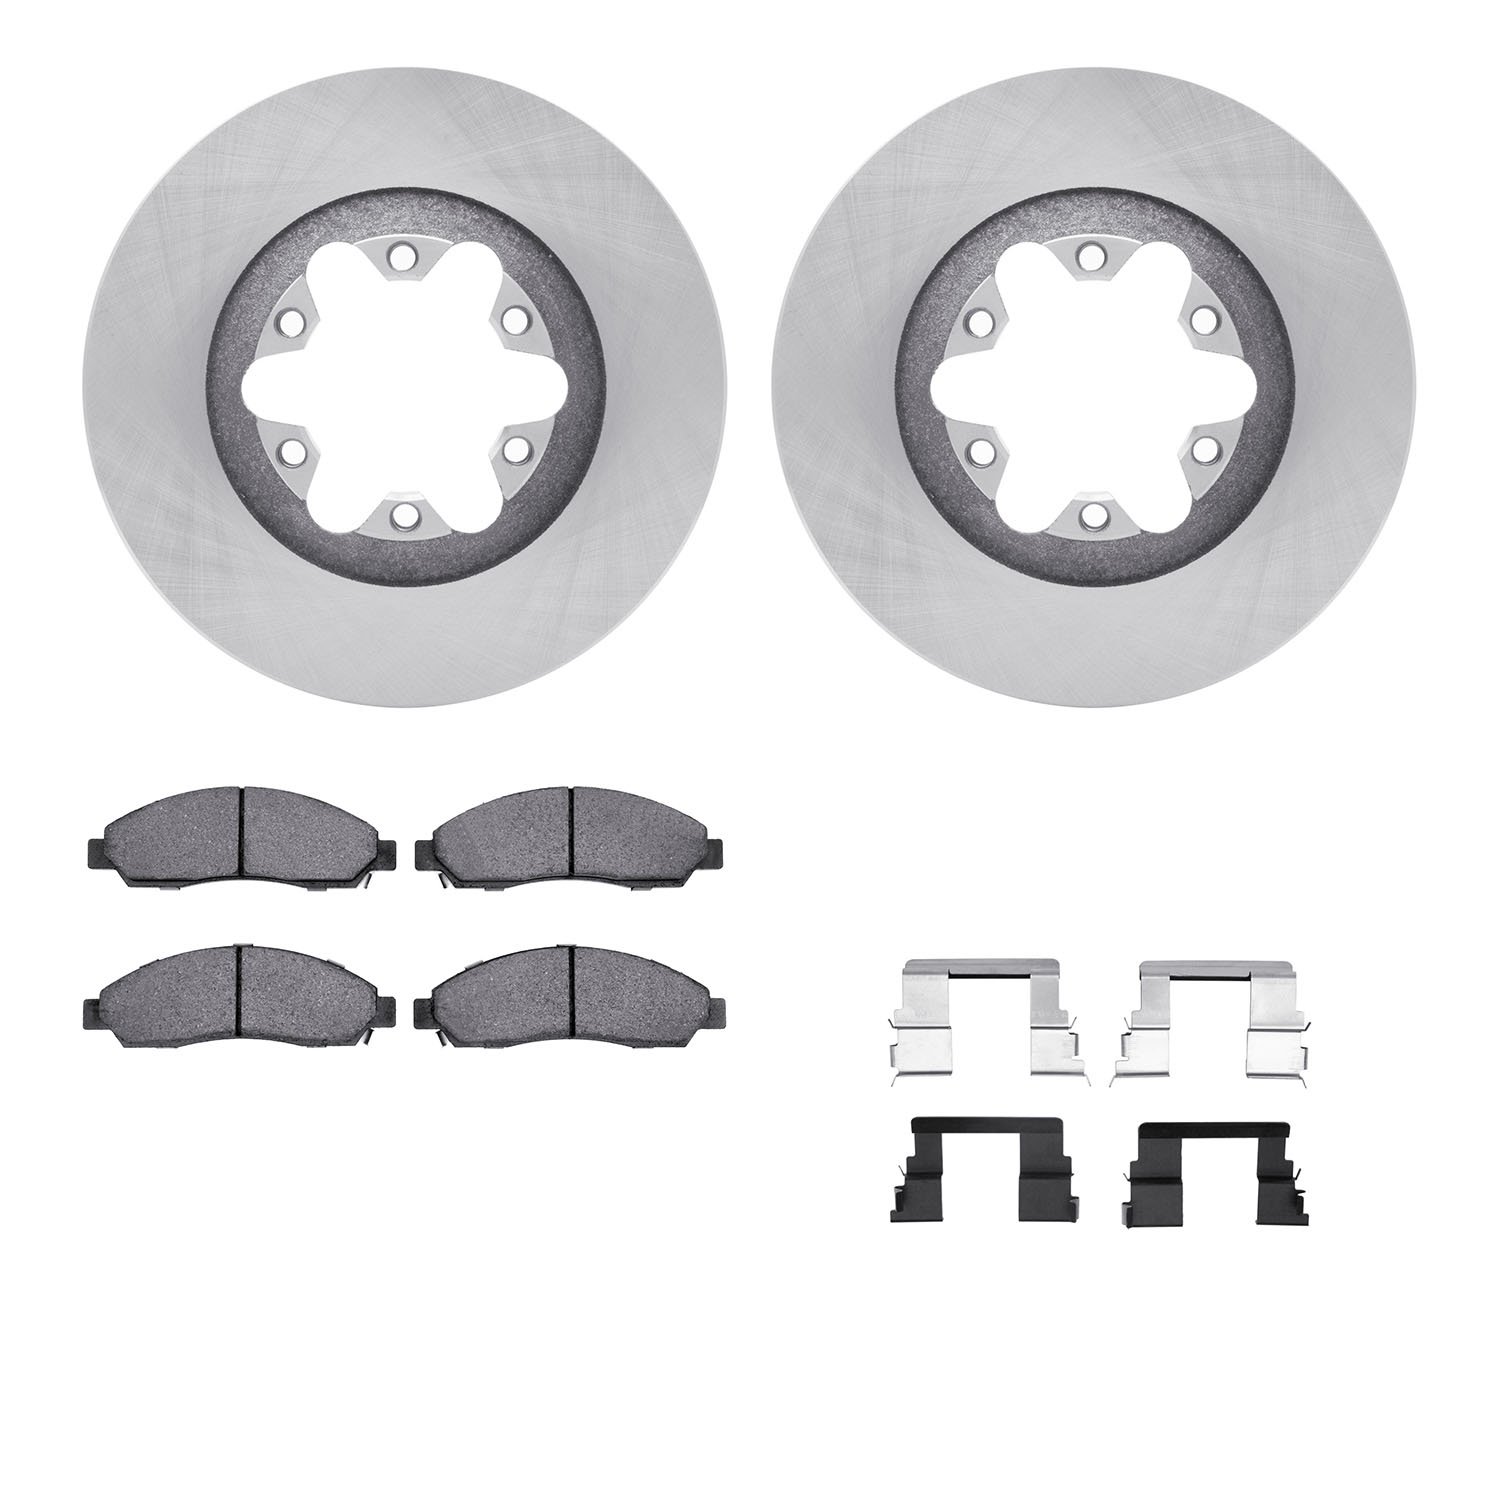 6412-48100 Brake Rotors with Ultimate-Duty Brake Pads Kit & Hardware, 2004-2008 GM, Position: Front